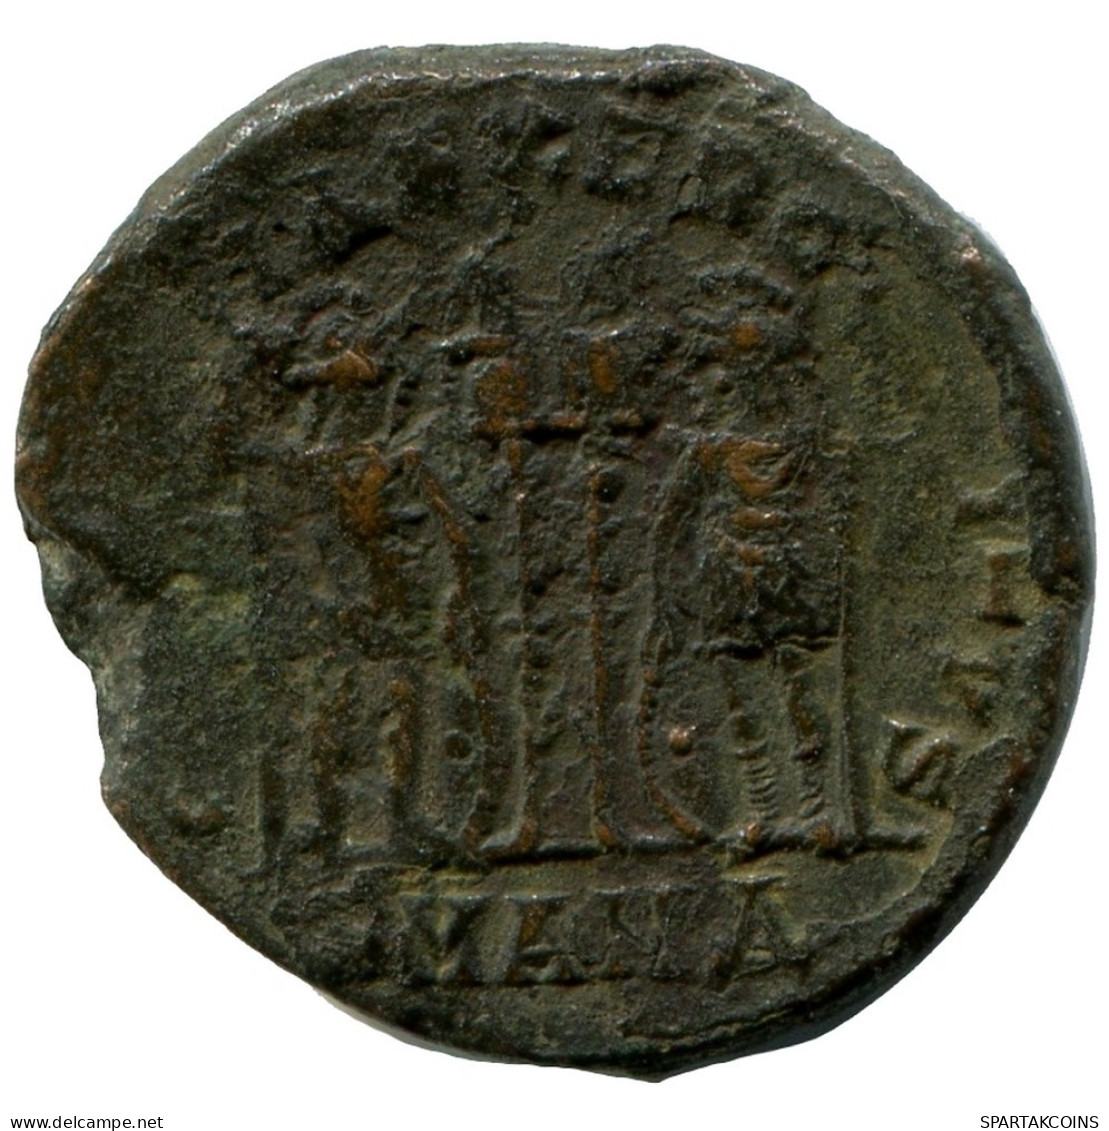 CONSTANTINE I MINTED IN ANTIOCH FOUND IN IHNASYAH HOARD EGYPT #ANC10698.14.U.A - El Imperio Christiano (307 / 363)